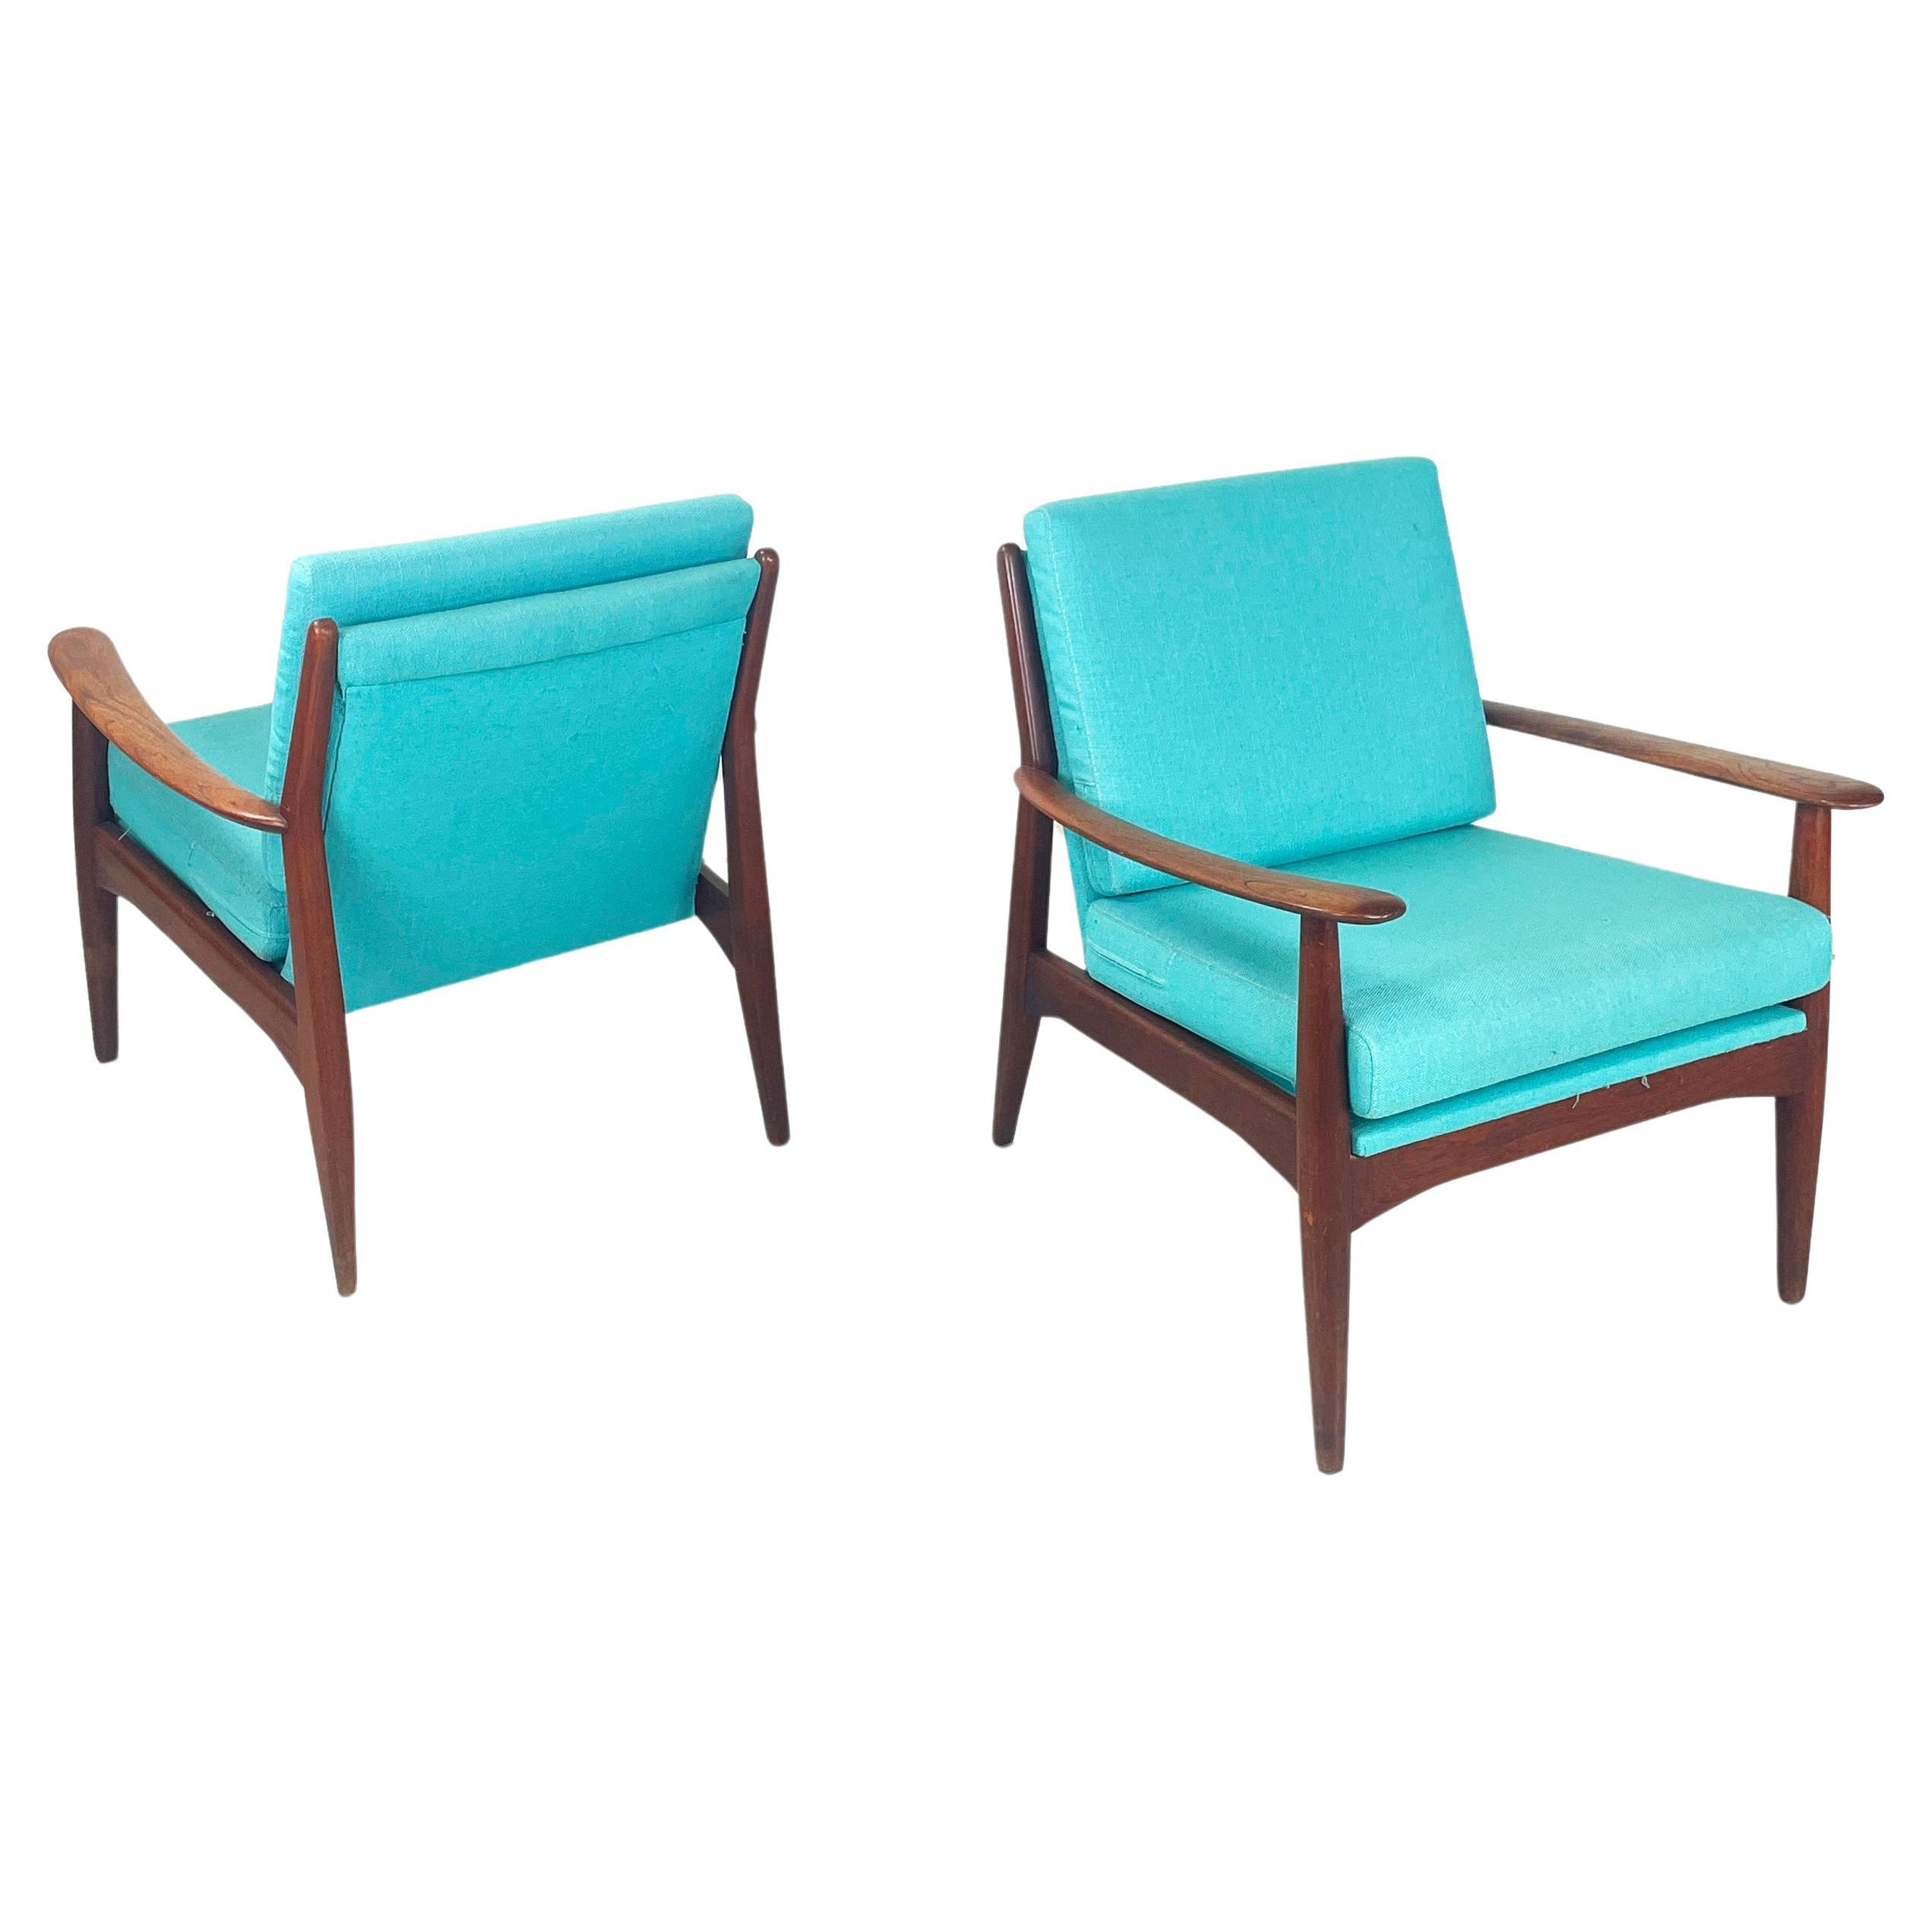 European mid-century modern Armchairs in light blue fabric and wood, 1960s For Sale